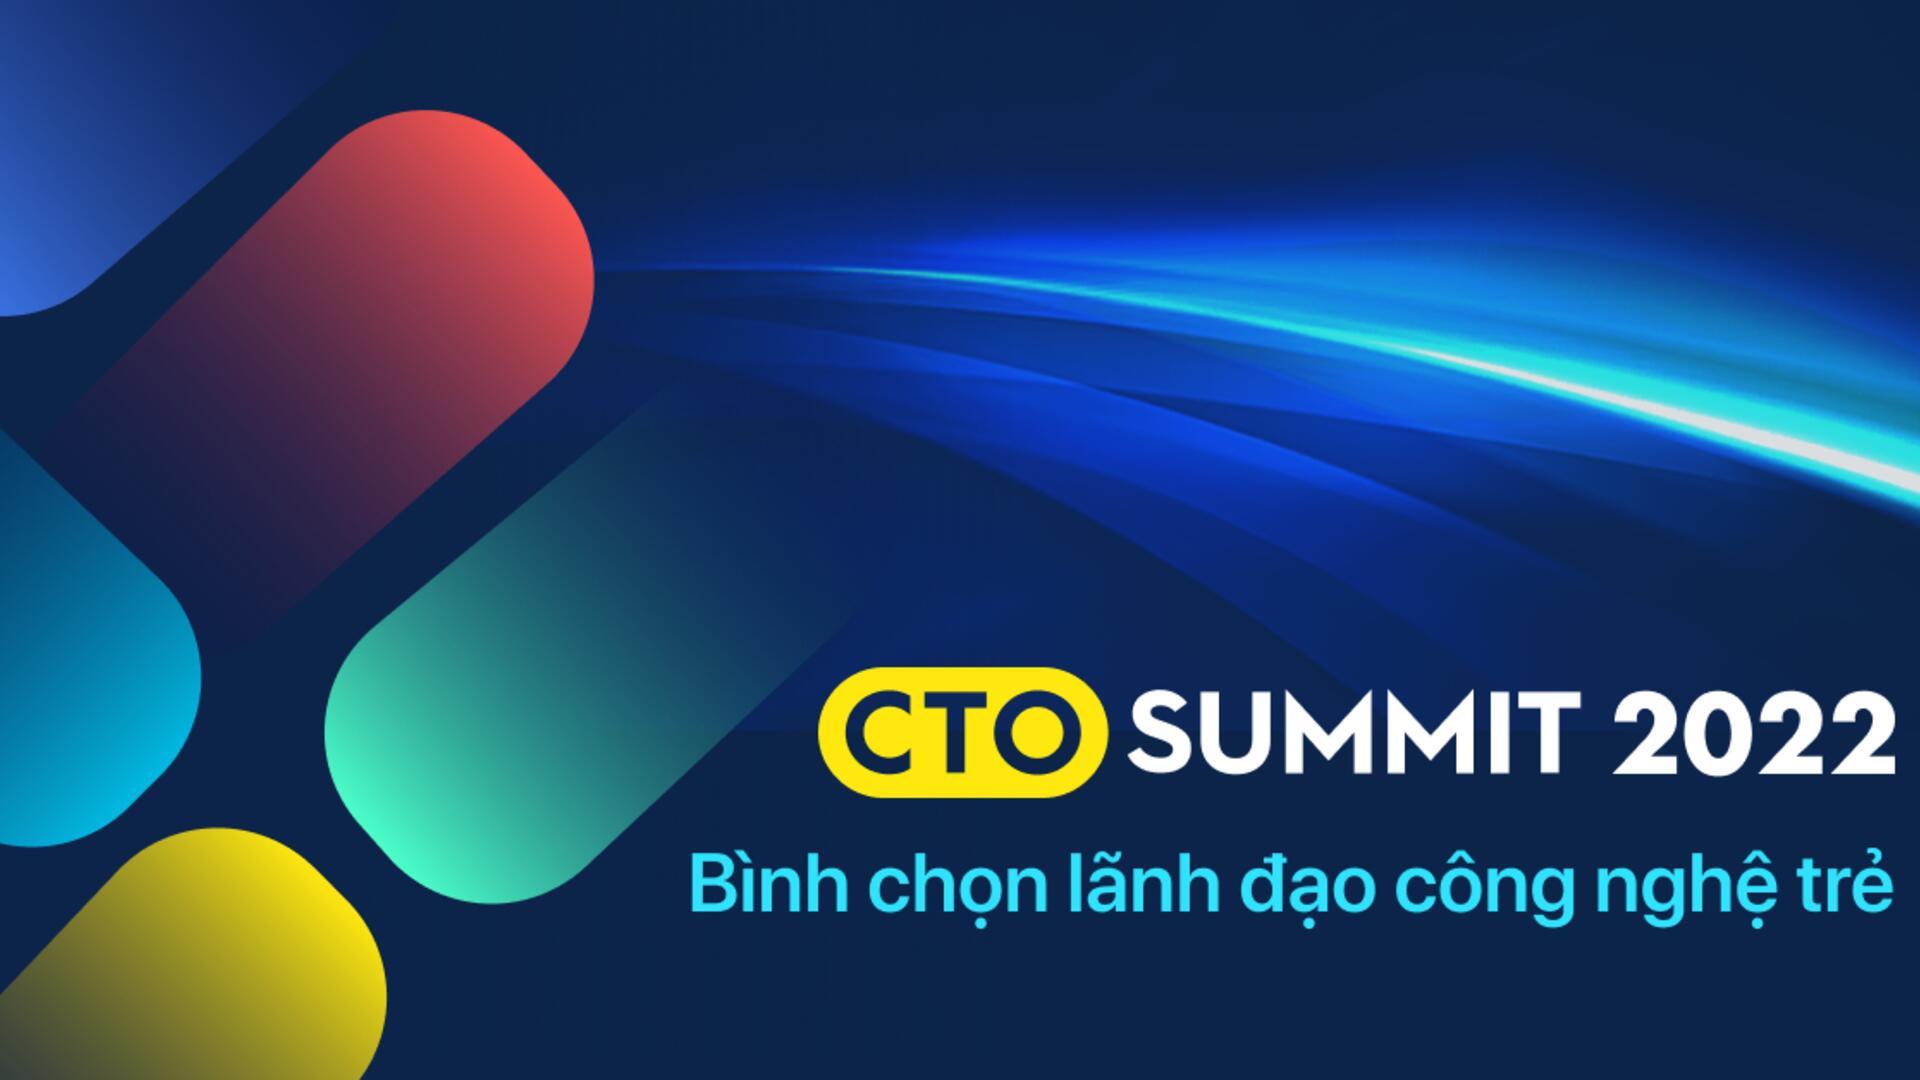 Experts from VNETWORK reached the Top 30 CTO SUMMIT 2022